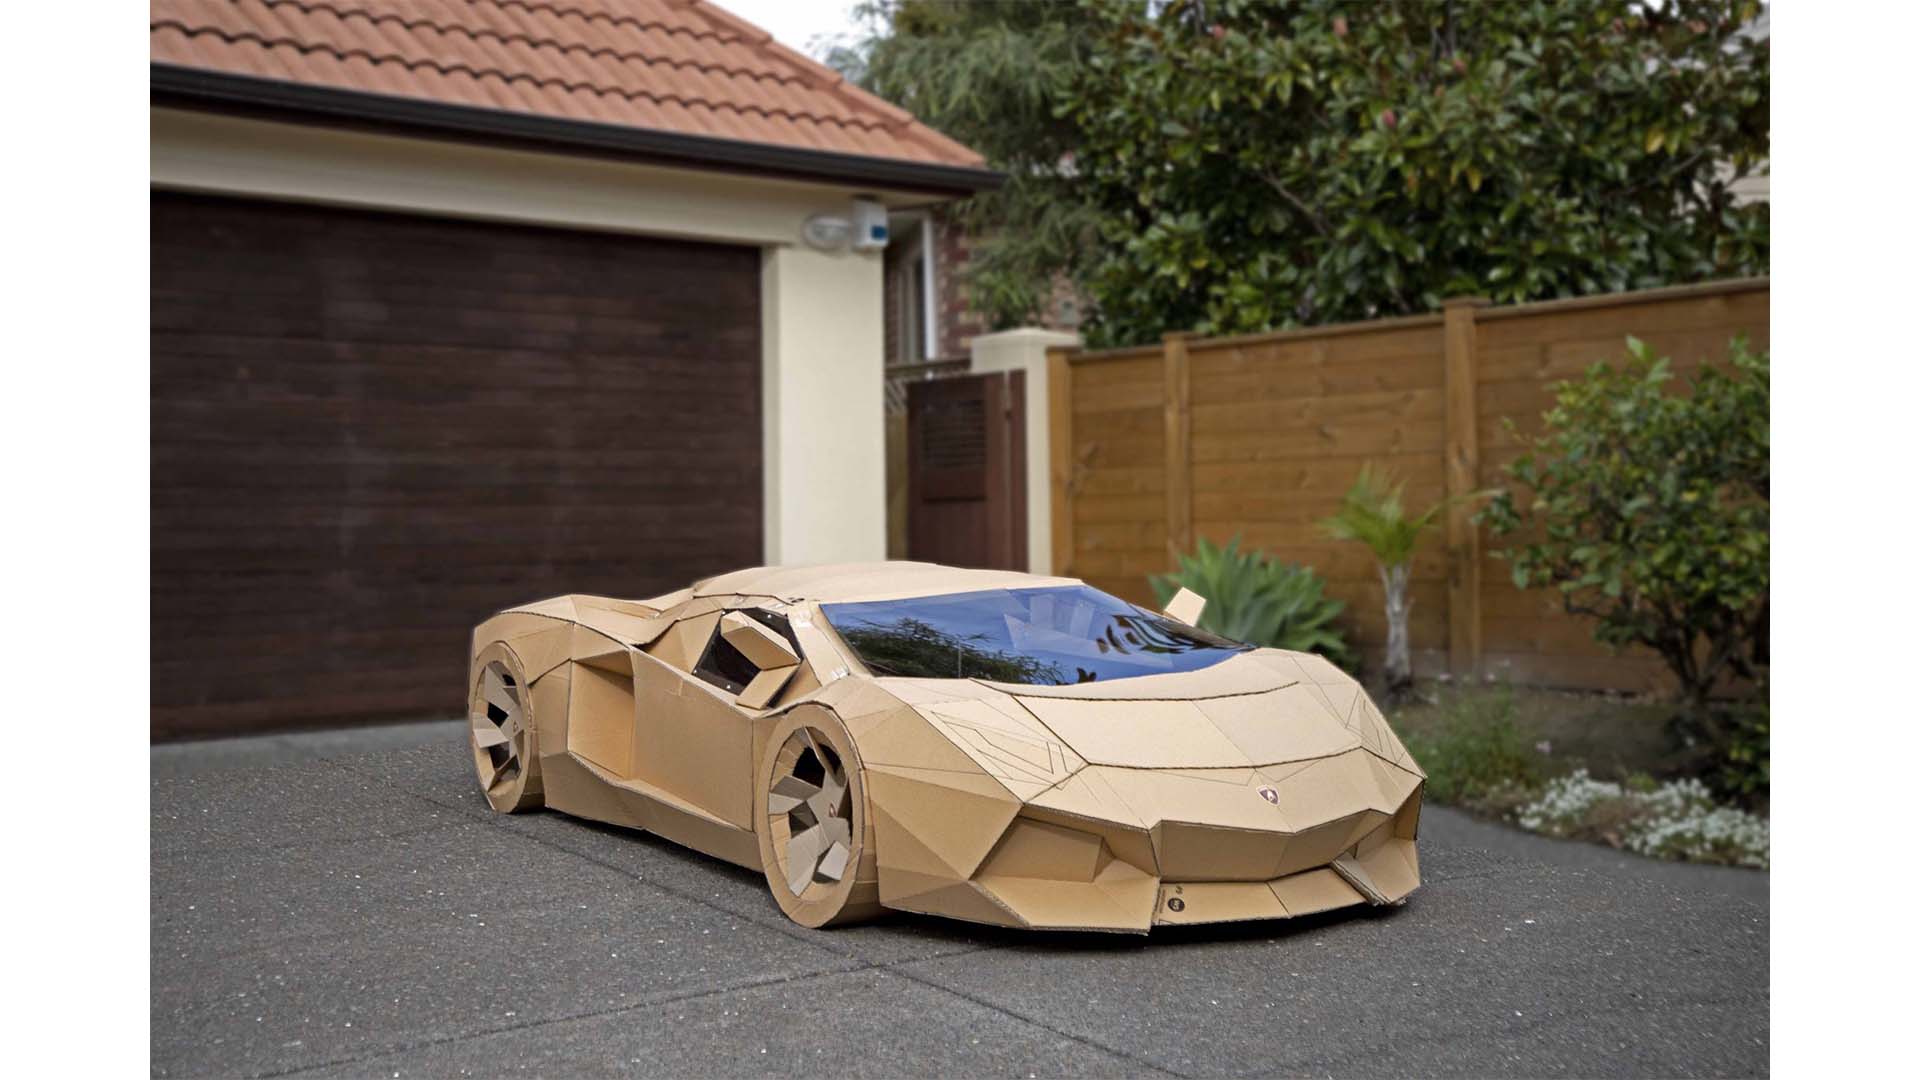 A cardboard Lamborghini Aventador crafted by David from Auckland, sold for charity on Trade Me, fetching $10,420.